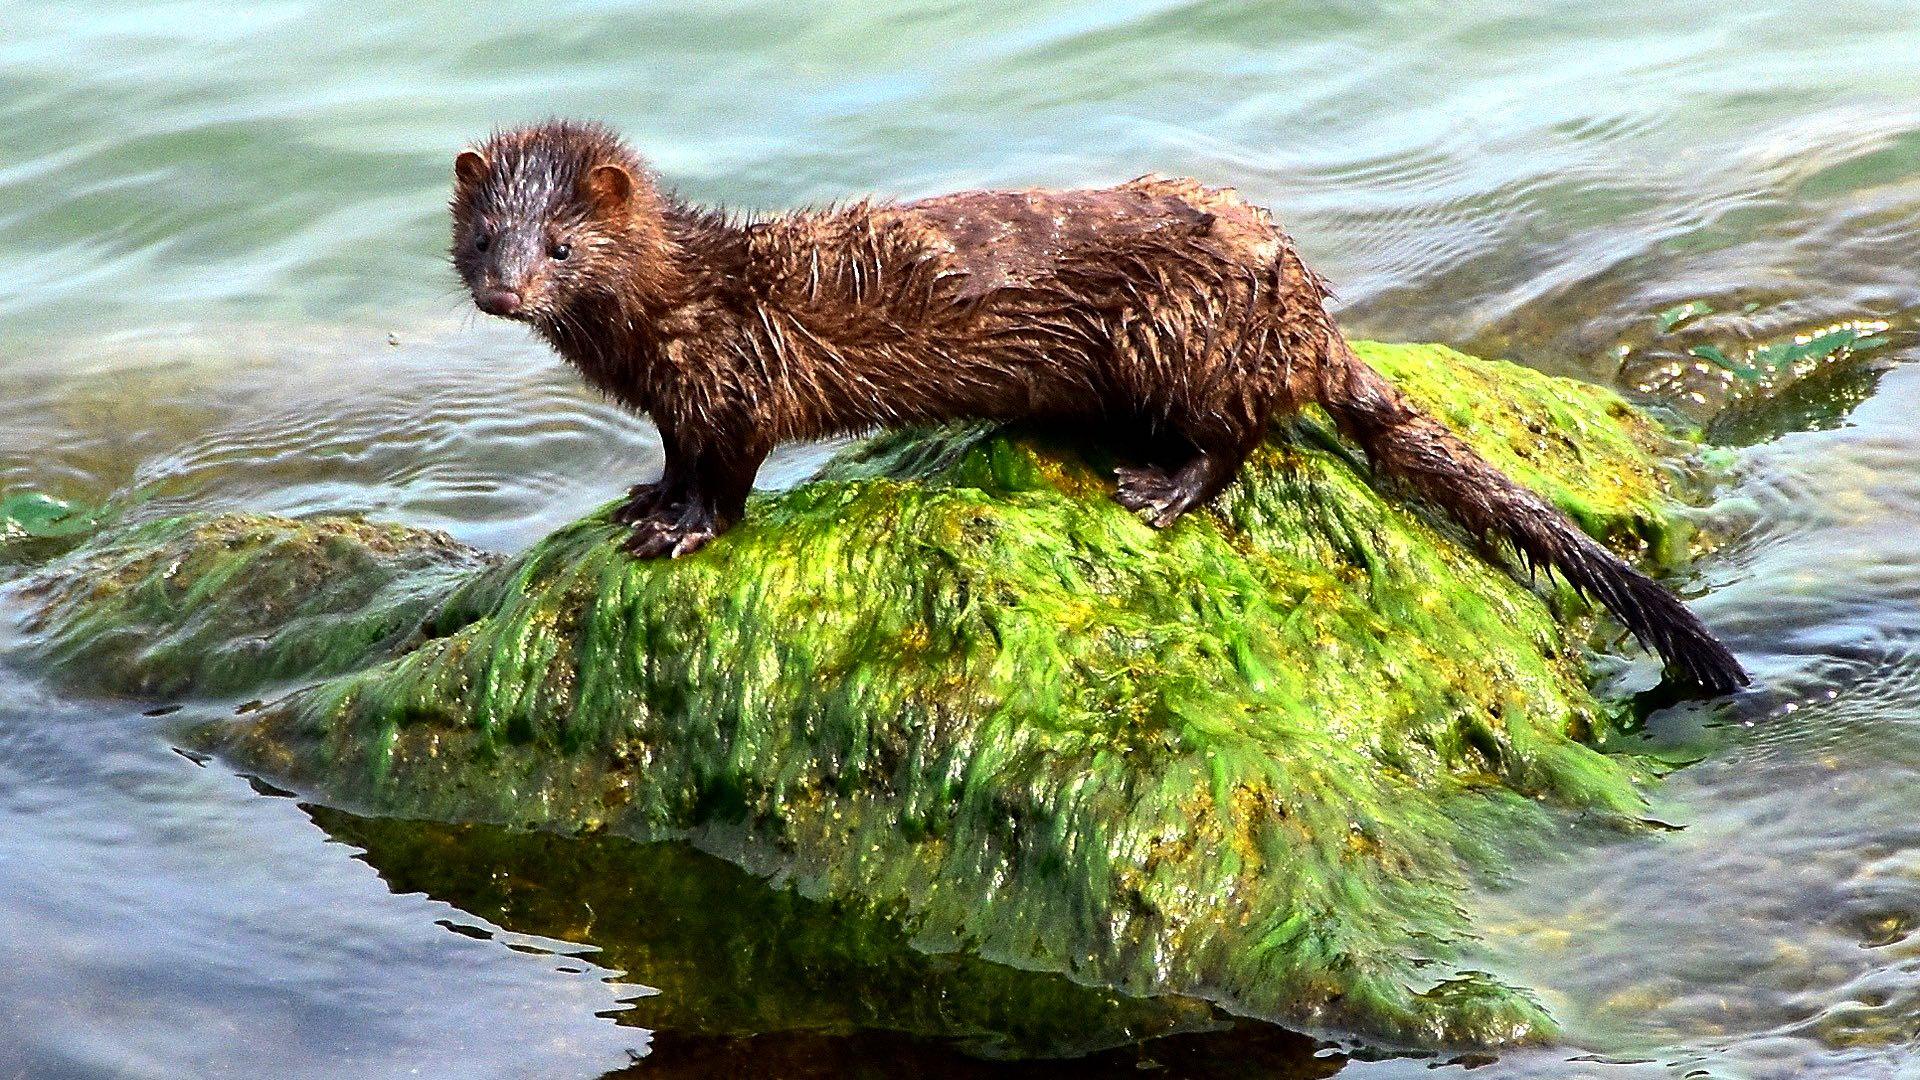 The American mink is equally at home on land or in the water. And despite its size, is not to be trifled with. (Jan Den Ouden / Pixabay)